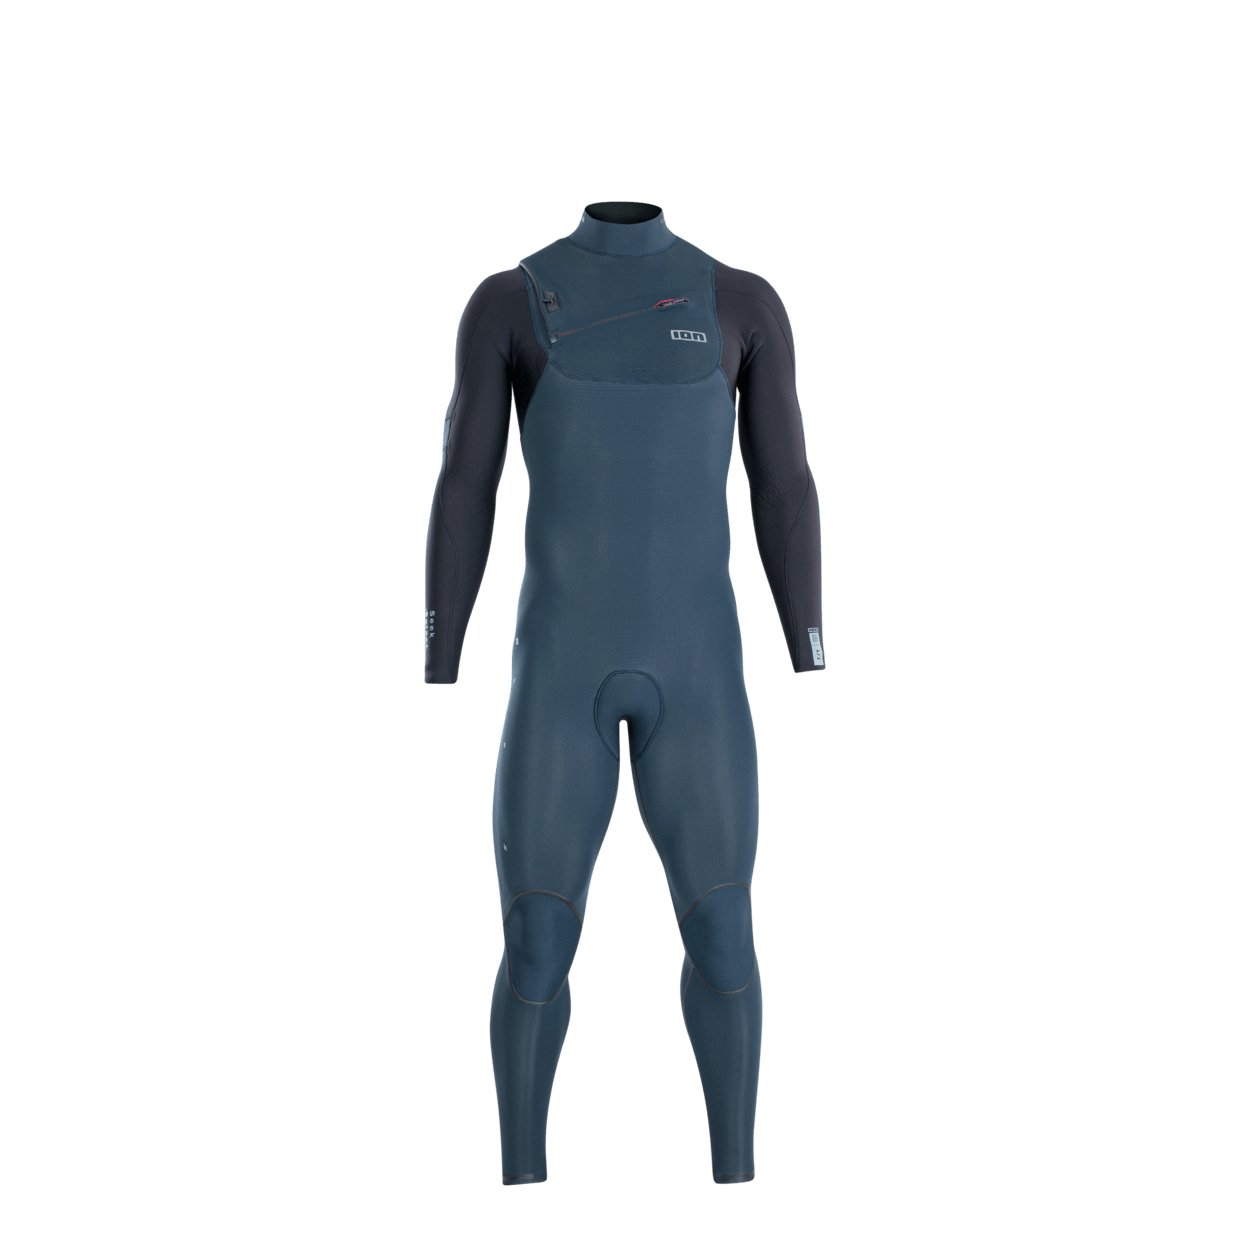 ION Seek Select 4/3 Front Zip 2022 - Worthing Watersports - 9010583055558 - Wetsuits - ION Water